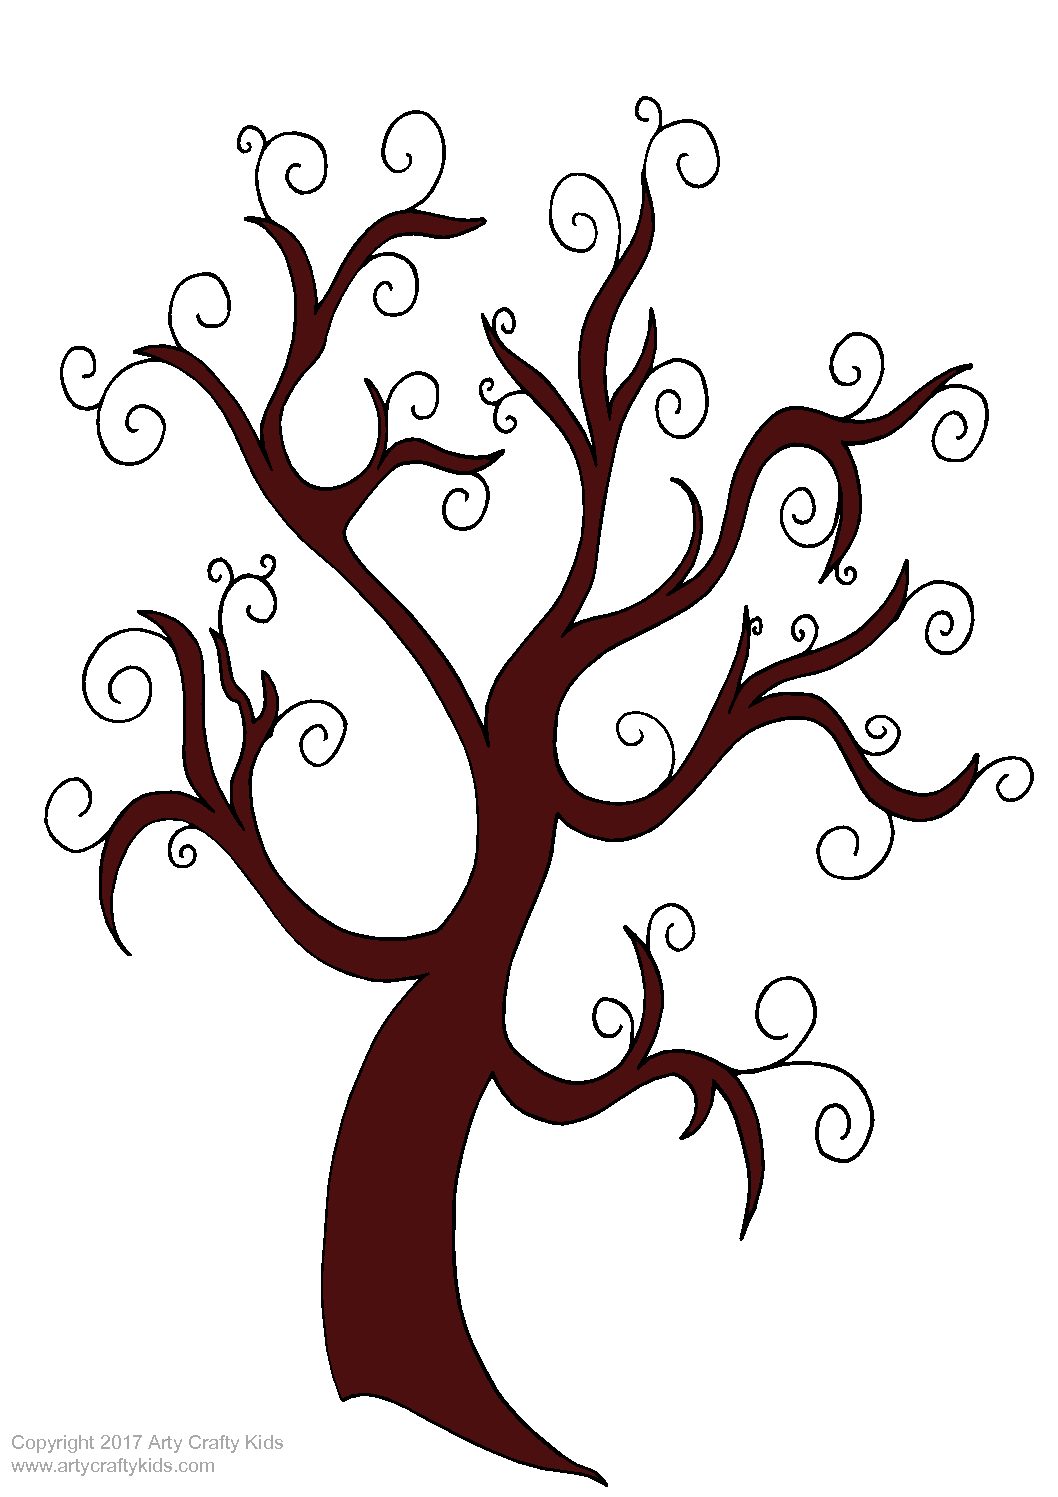 printable-tree-template-with-leaves-printable-templates